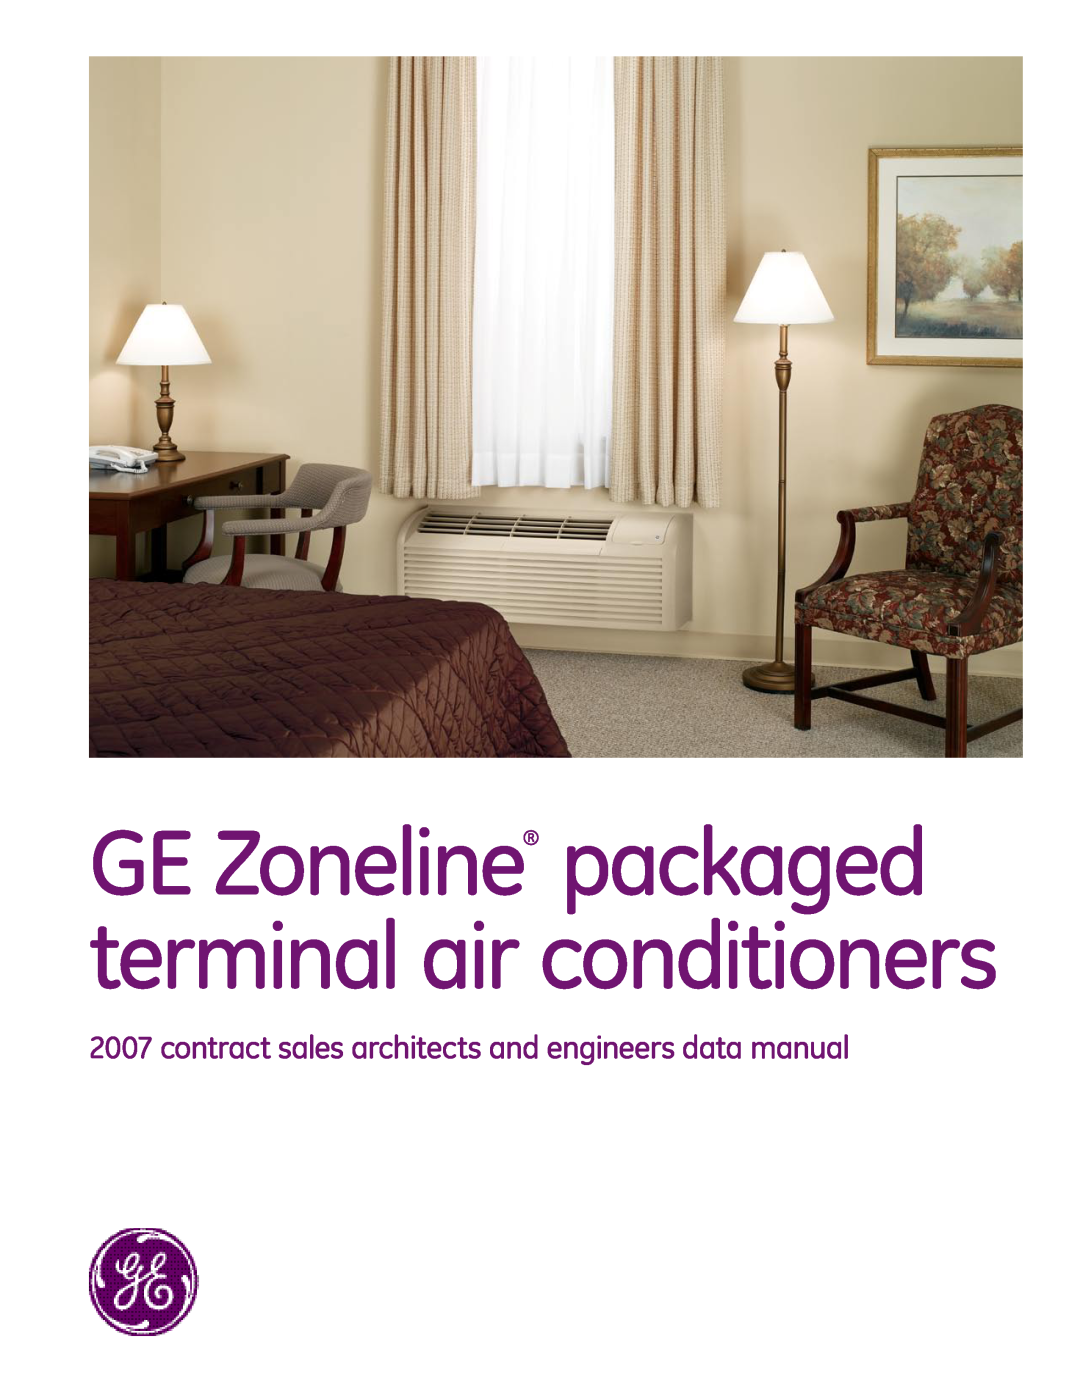 GE 2800 manual GE Zoneline packaged terminal air conditioners 